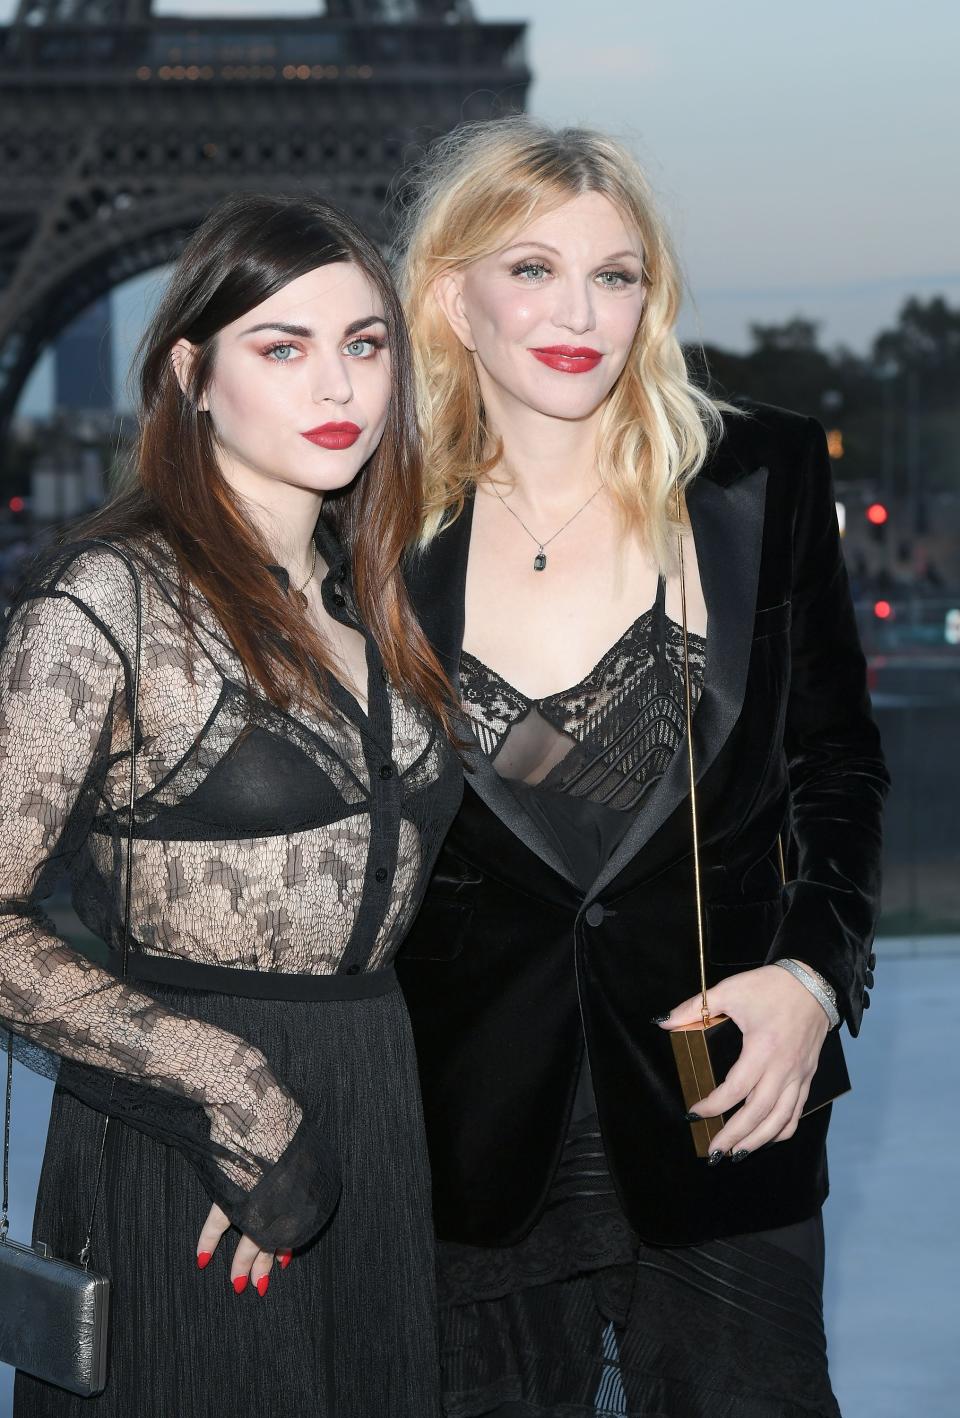 Frances Bean Cobain and Courtney Love during Paris Fashion Week in September. (Photo: Dominique Charriau/WireImage)